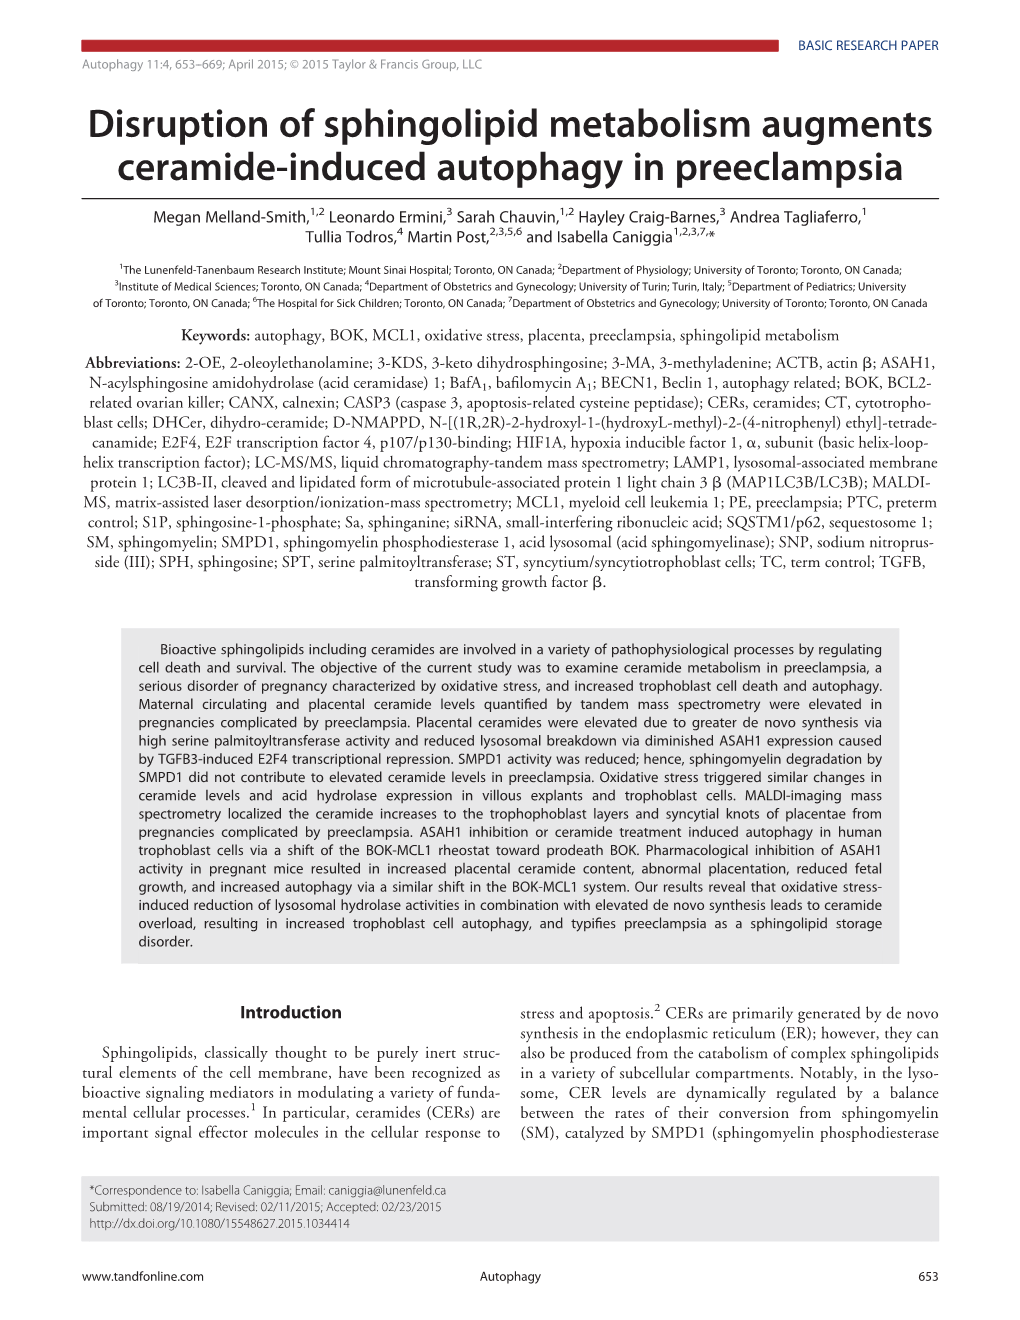 Disruption of Sphingolipid Metabolism Augments Ceramide-Induced Autophagy in Preeclampsia